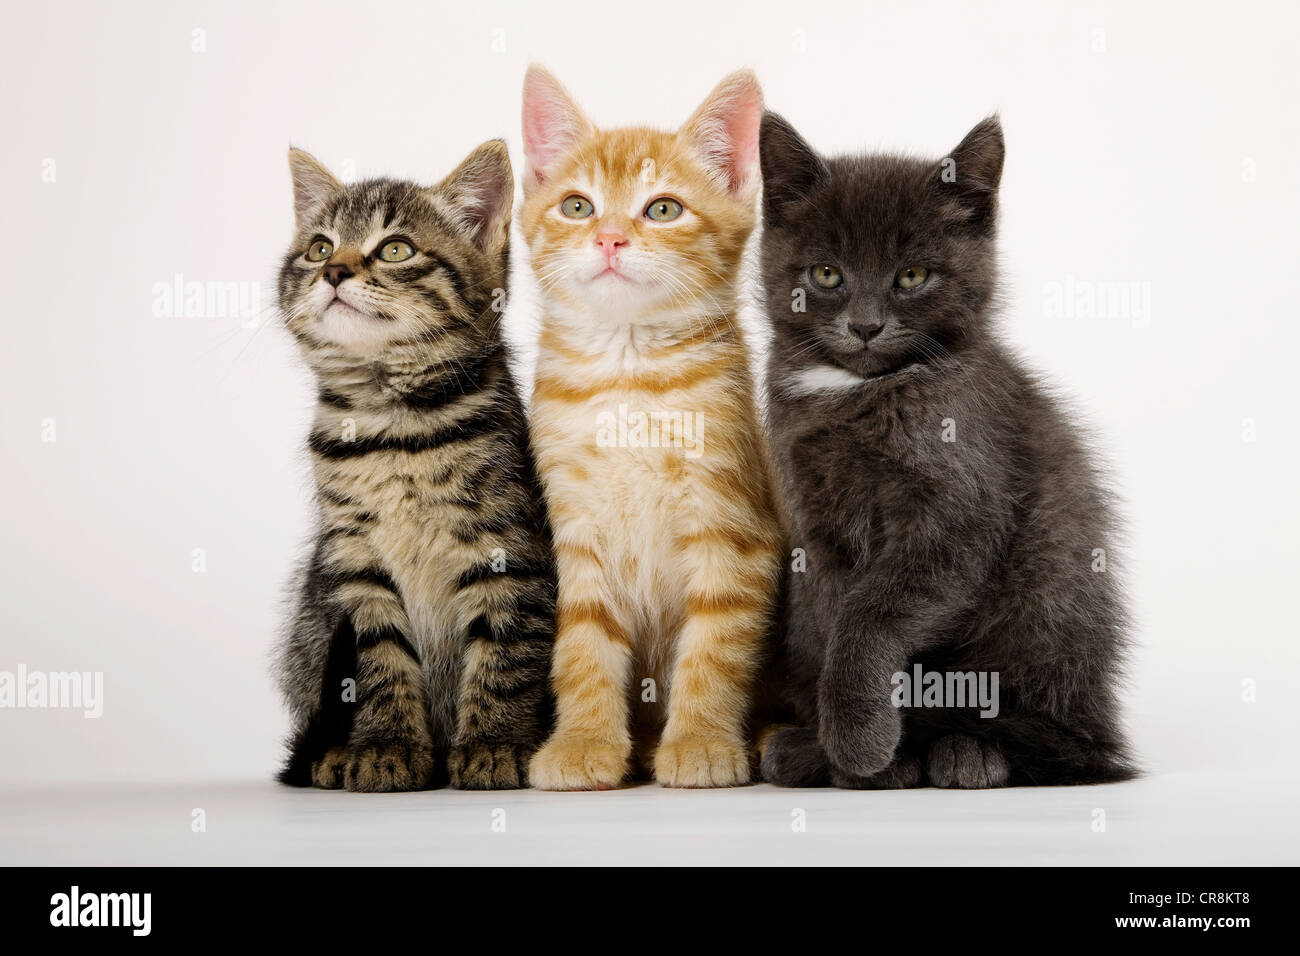 Three kittens side by side Stock Photo